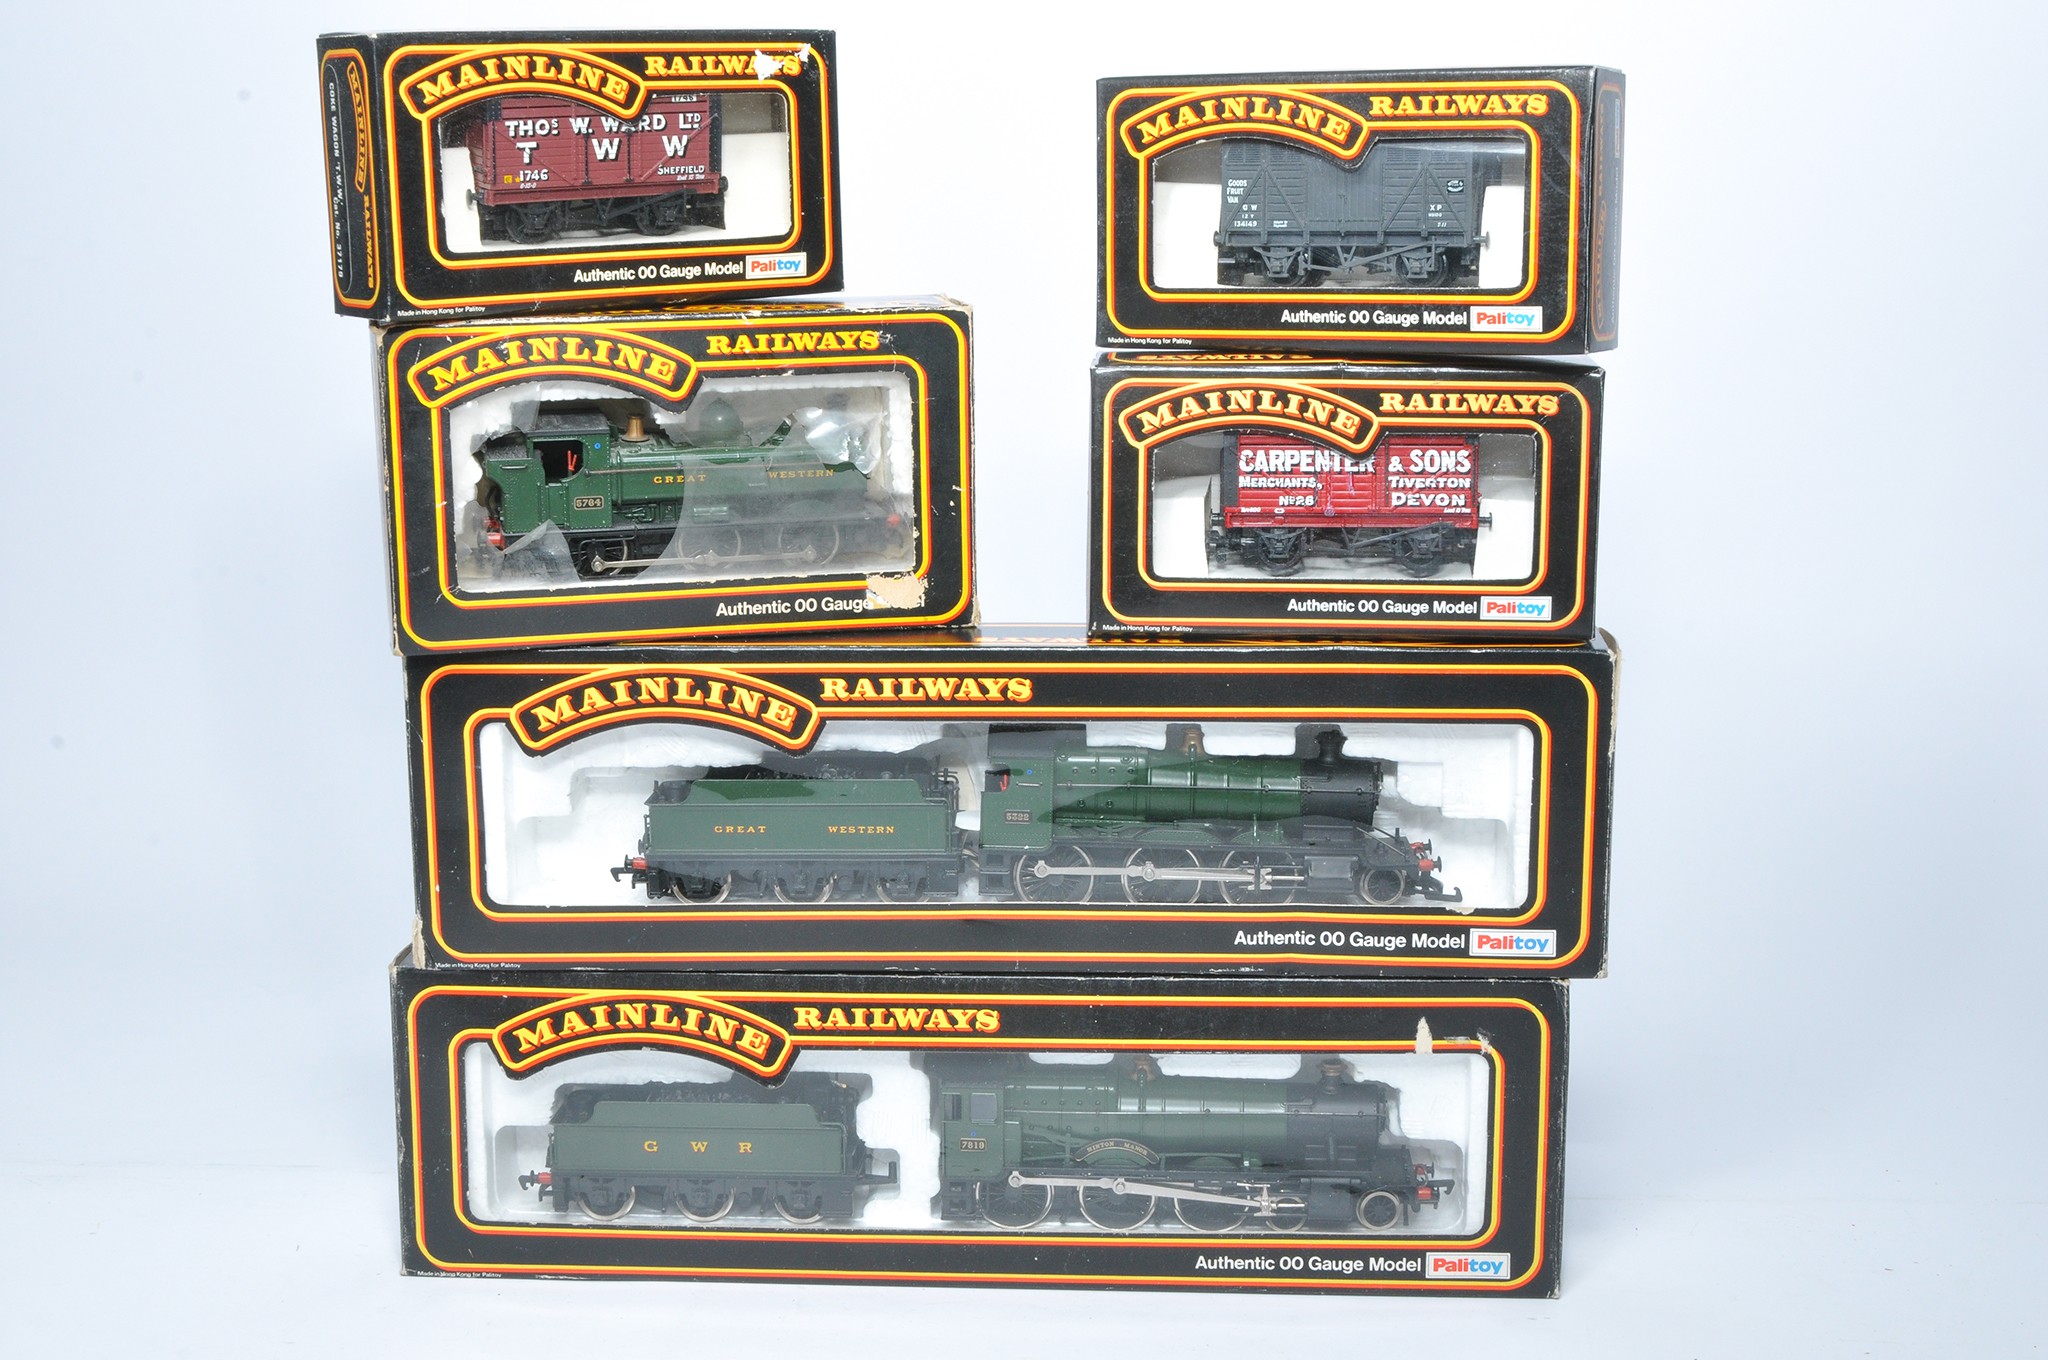 Model Railway comprising Mainline locomotive issues and rolling stock as shown.